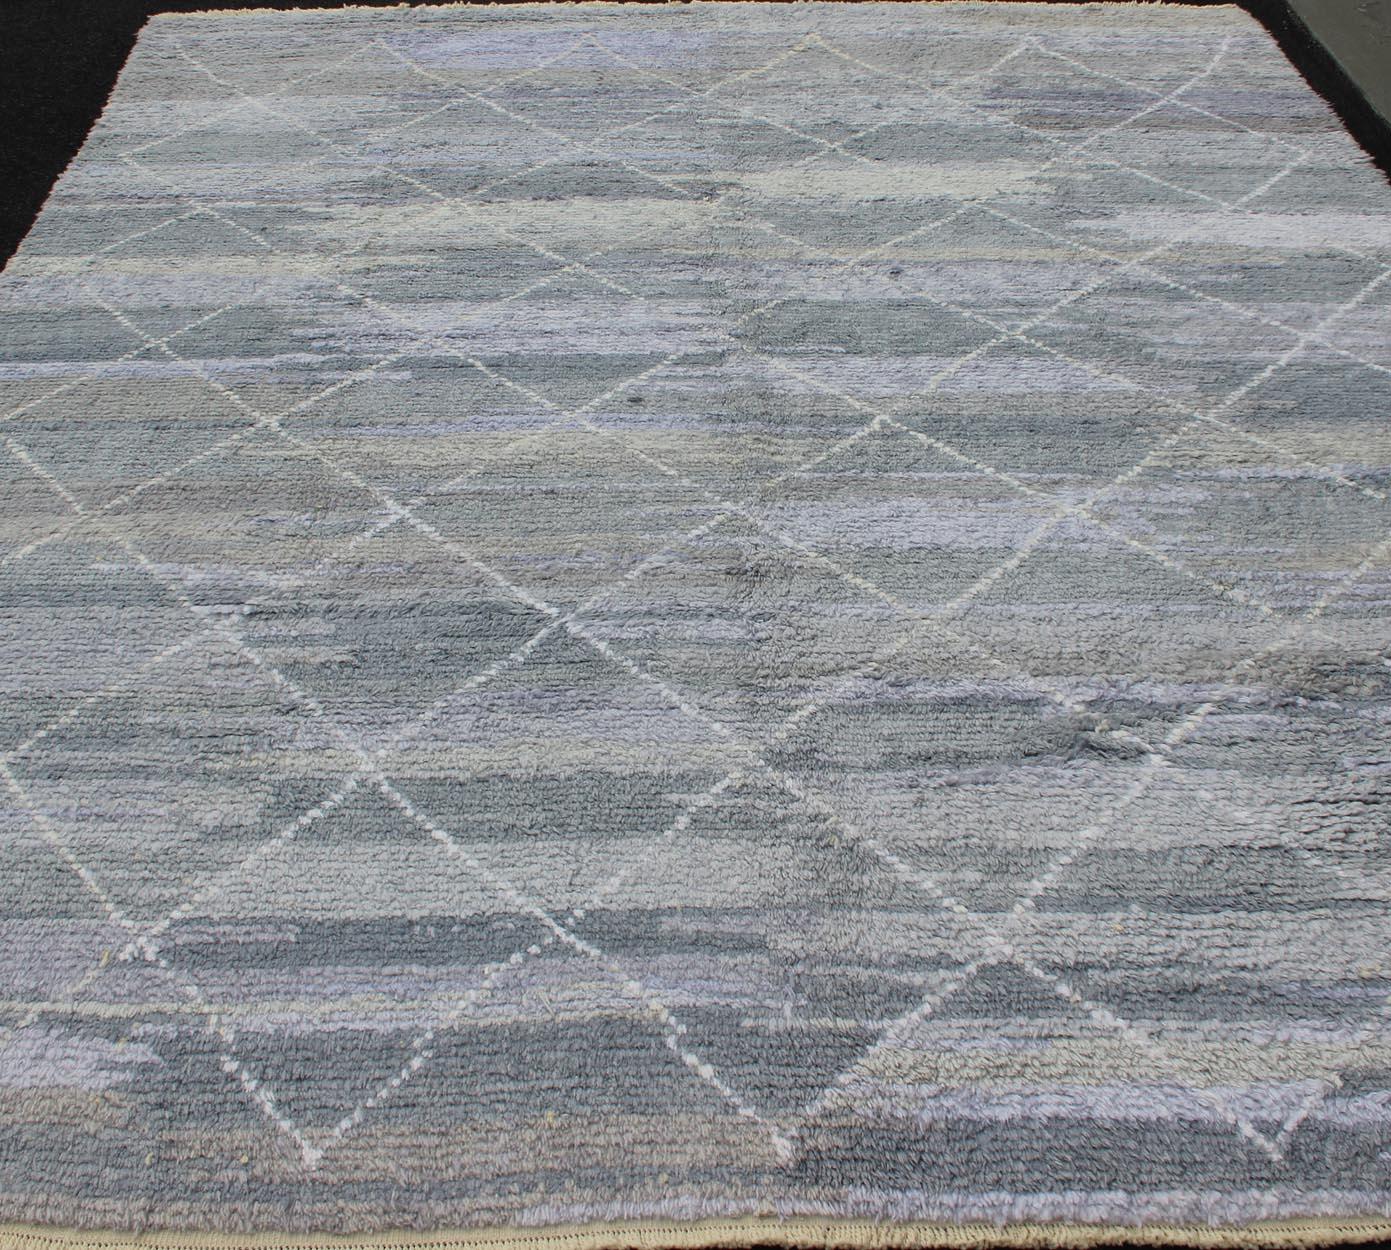 Modern Moroccan Rug with All-Over Lattice Design in Grey Tones 6